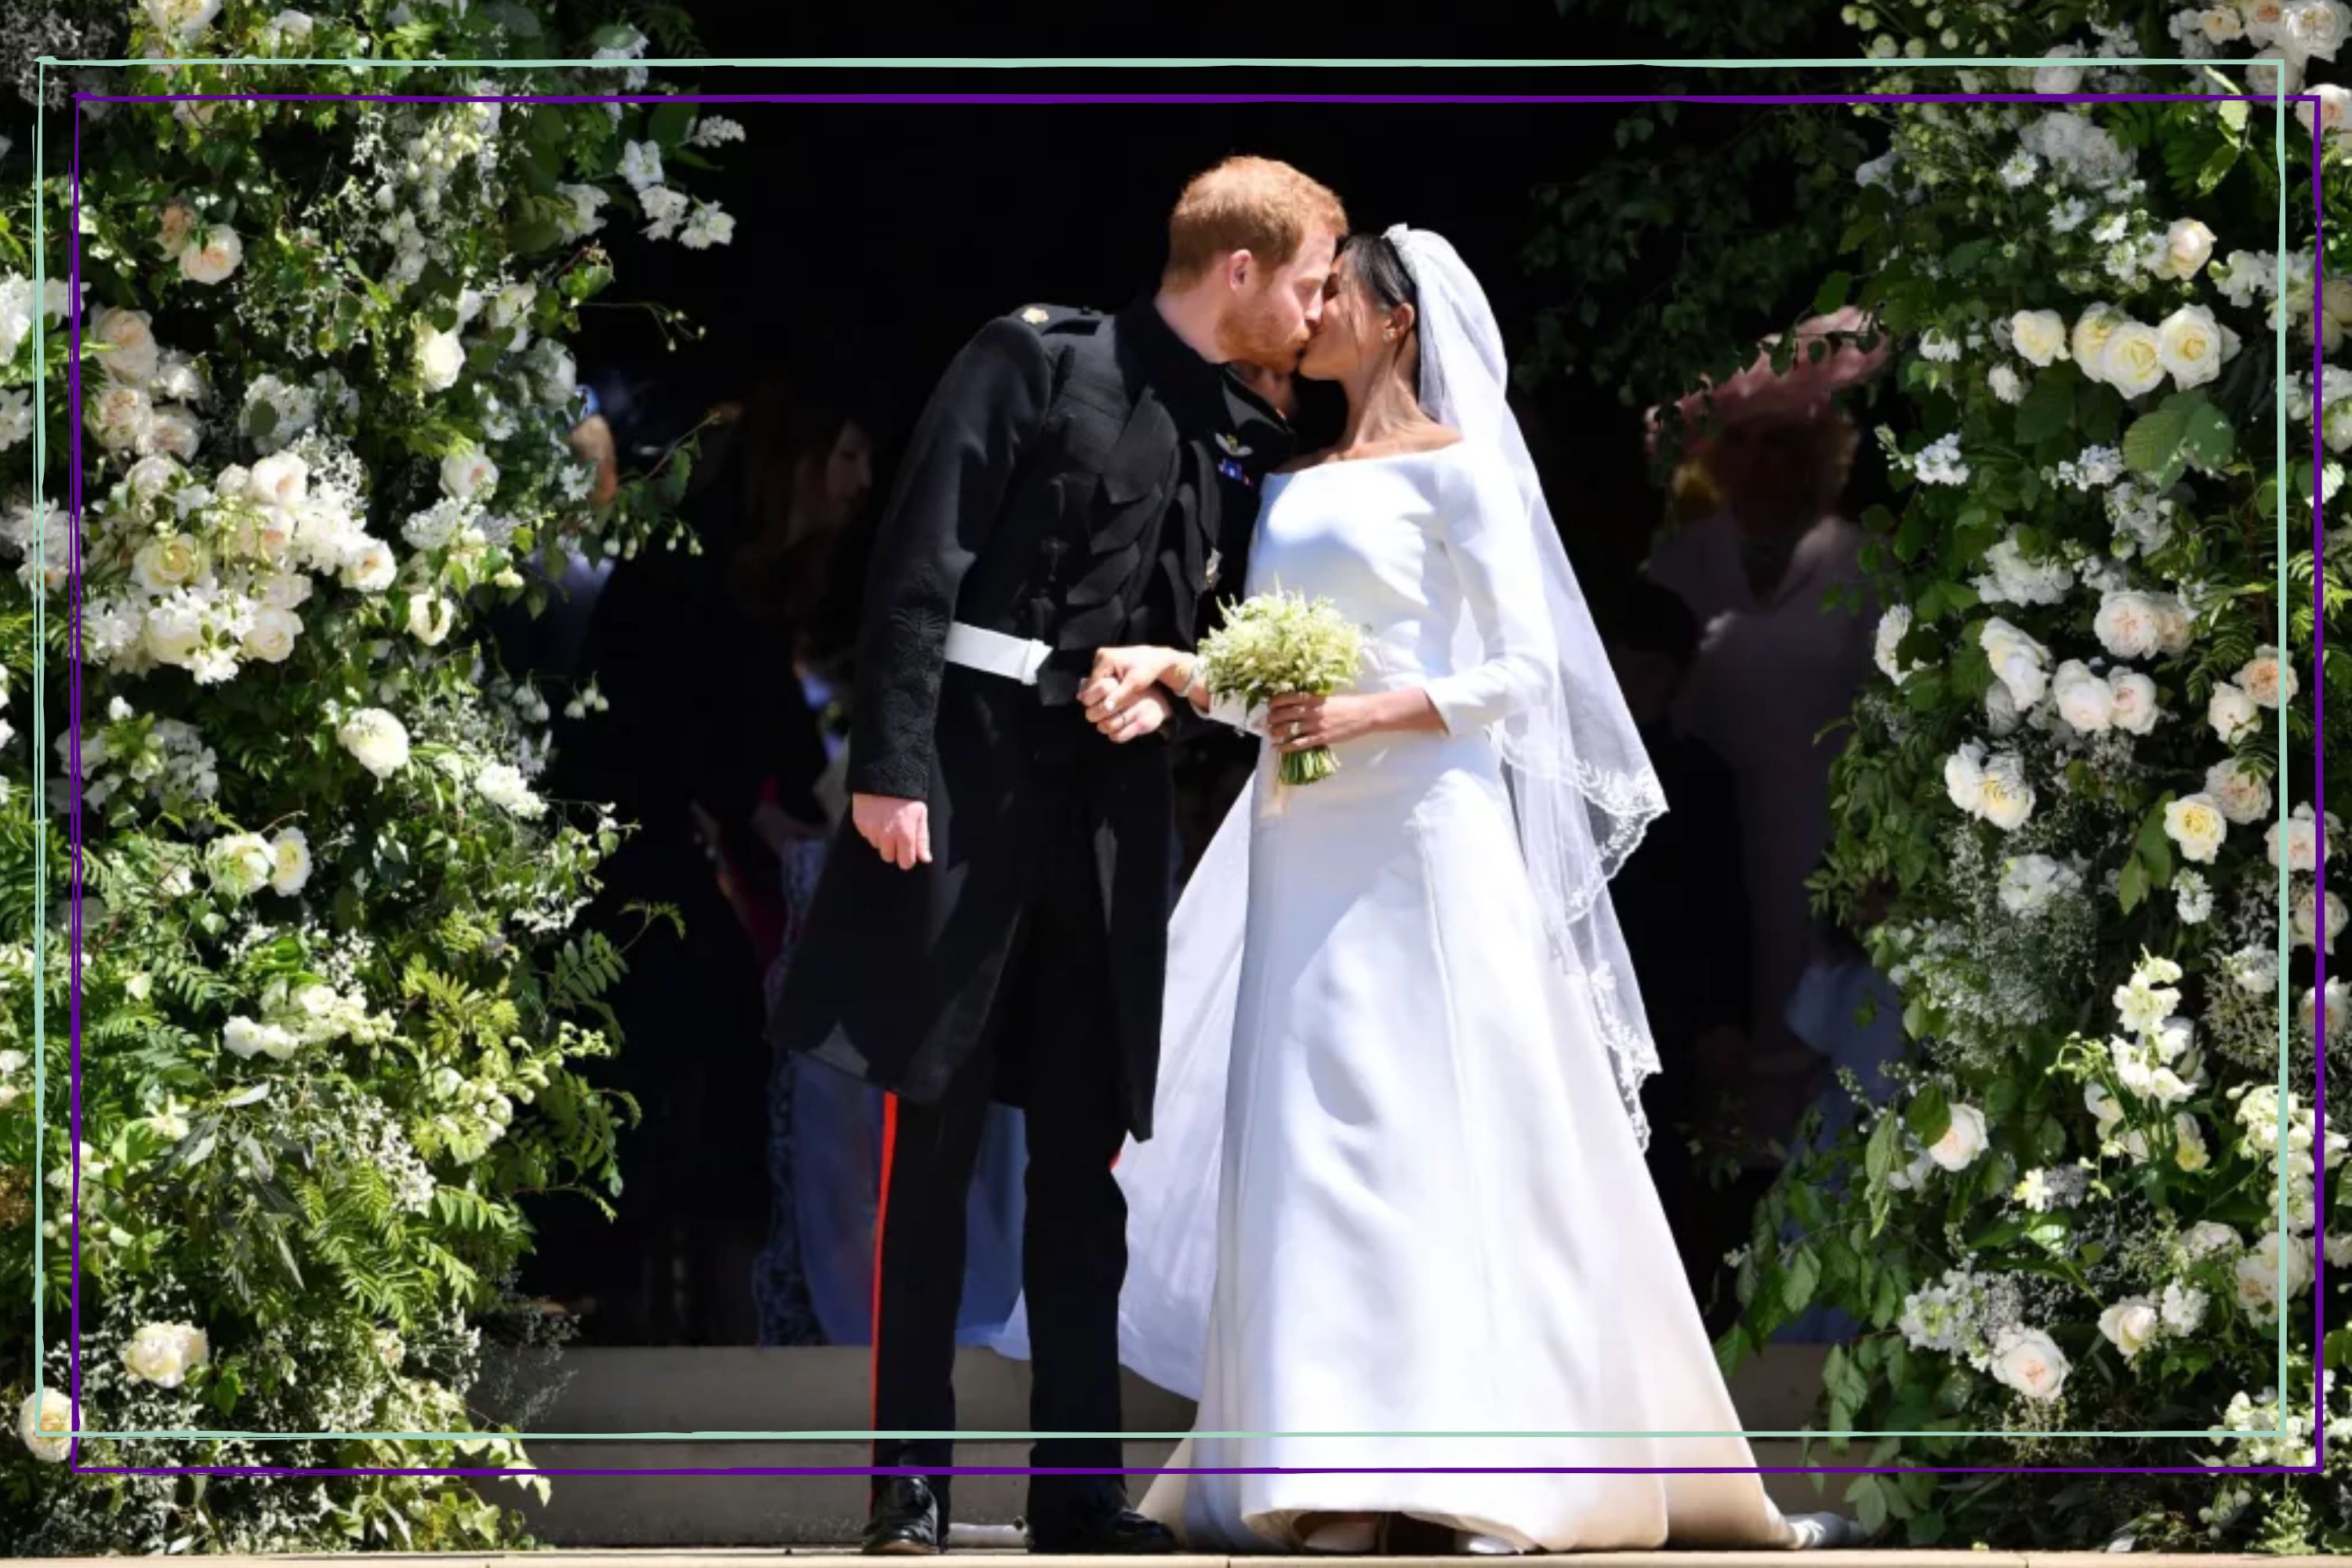 When did Prince Harry and Meghan Markle get married? GoodTo image